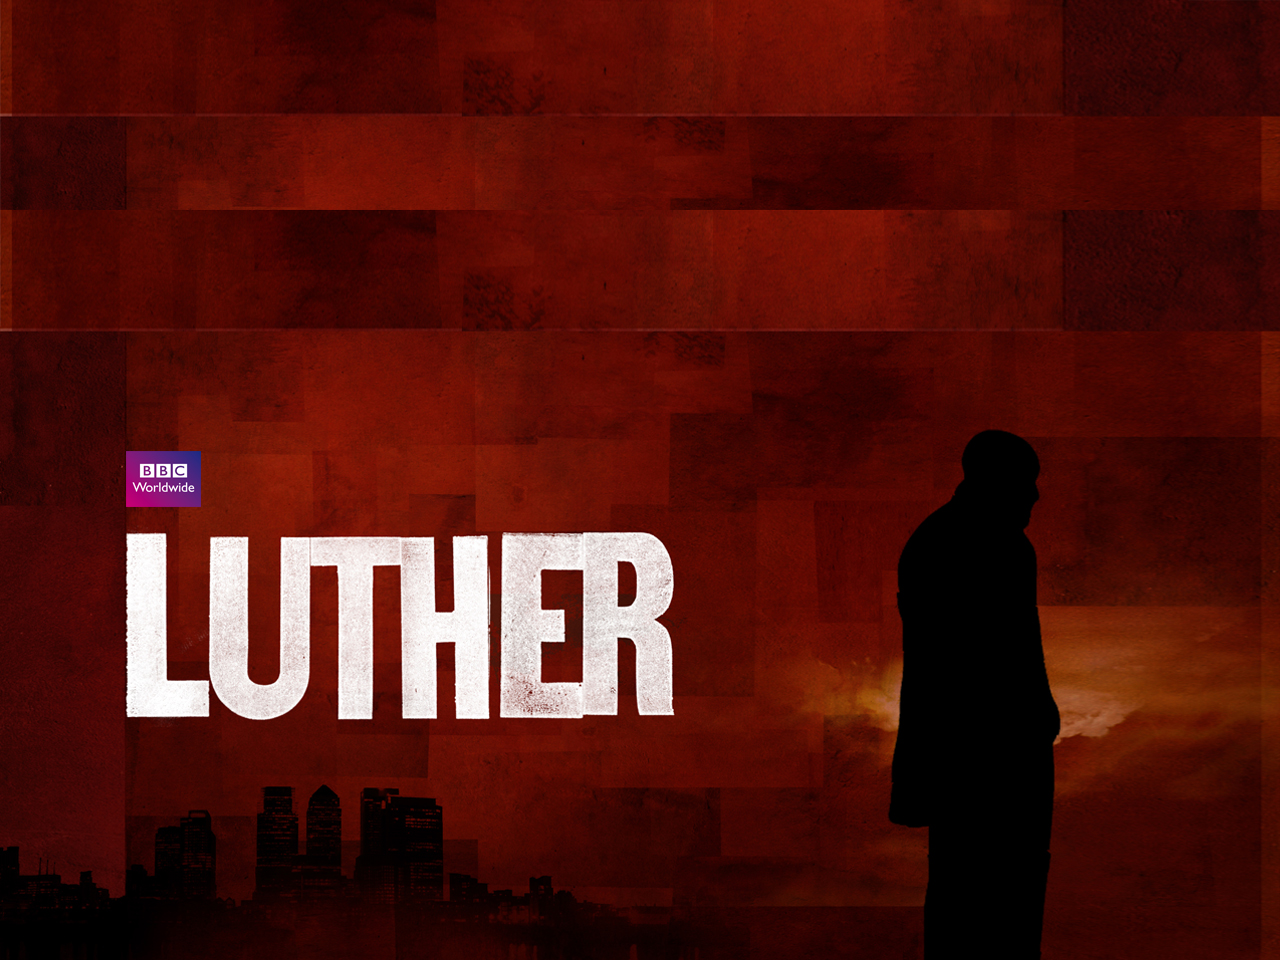 Luther Wallpaper X